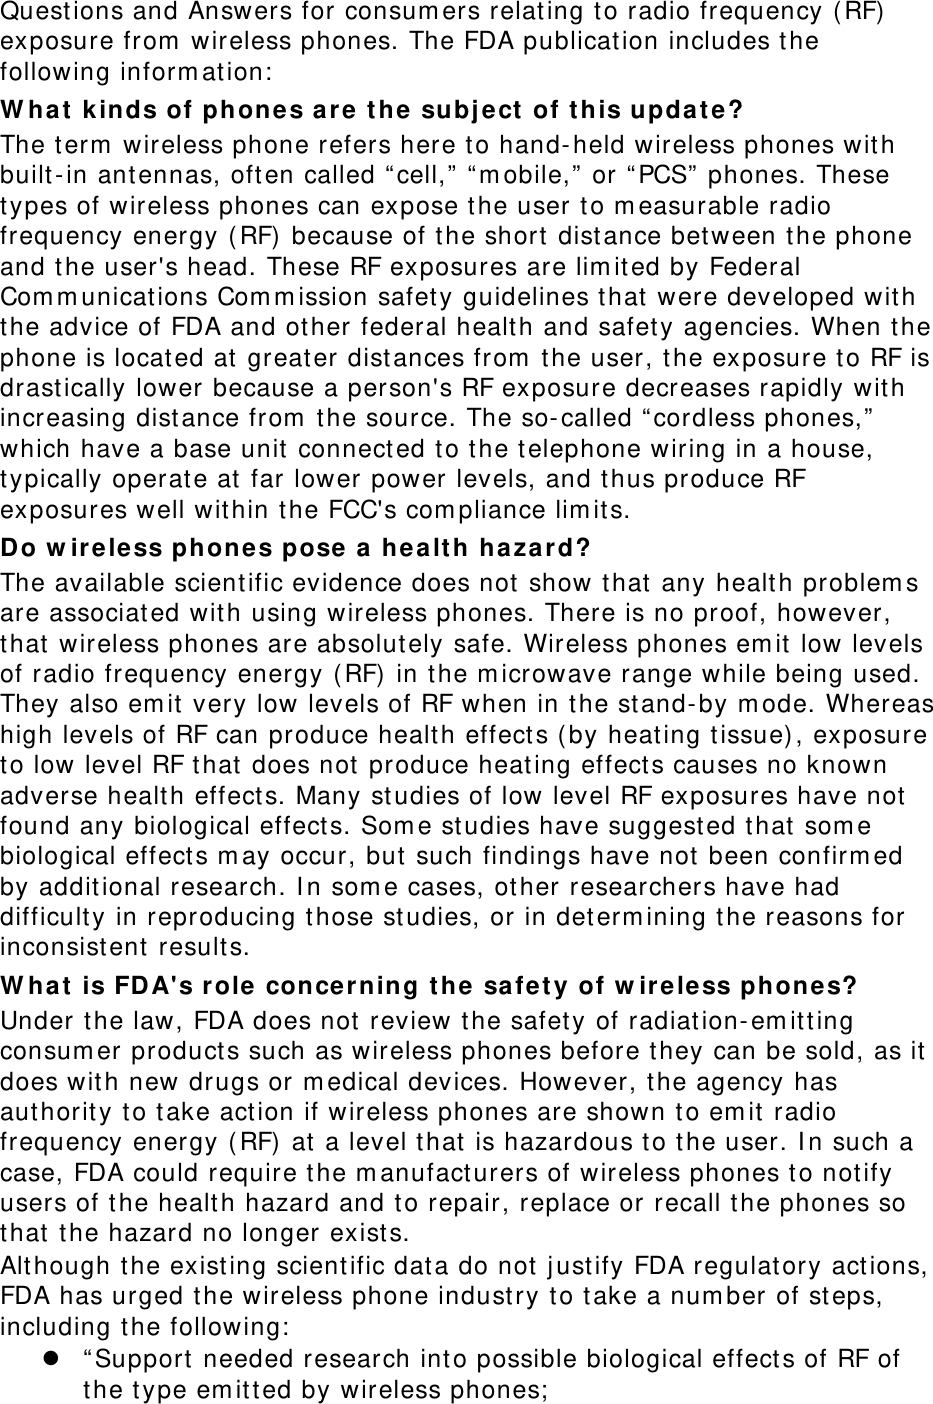 Quest ions and Answers for consum ers relat ing t o radio frequency ( RF)  exposure from  wireless phones. The FDA publication includes the following inform ation:  W ha t  k inds of phone s are t he subj ect  of t his updat e? The t erm  wireless phone refers here t o hand-held wireless phones with built- in ant ennas, oft en called “ cell,”  “ m obile,”  or “ PCS”  phones. These types of wireless phones can expose t he user to m easurable radio frequency energy ( RF)  because of the short  dist ance bet ween t he phone and t he user&apos;s head. These RF exposures are lim it ed by Federal Com m unicat ions Com m ission safet y guidelines t hat were developed wit h the advice of FDA and ot her federal healt h and safety agencies. When the phone is located at  great er dist ances from  the user, the exposure t o RF is drast ically lower because a person&apos;s RF exposure decreases rapidly wit h increasing distance from  t he source. The so-called “ cordless phones,”  which have a base unit connect ed t o the t elephone wiring in a house, typically operate at far lower power levels, and t hus produce RF exposures well wit hin t he FCC&apos;s com pliance lim its. Do w irele ss phones pose a  healt h ha za r d? The available scient ific evidence does not show t hat any healt h problem s are associated with using wireless phones. There is no proof, however, that wireless phones are absolutely safe. Wireless phones em it low levels of radio frequency energy (RF)  in the m icrowave range while being used. They also em it very low levels of RF when in t he st and- by m ode. Whereas high levels of RF can produce healt h effect s ( by heat ing t issue) , exposure to low level RF t hat does not produce heat ing effect s causes no known adverse healt h effect s. Many st udies of low level RF exposures have not found any biological effect s. Som e st udies have suggest ed t hat som e biological effect s m ay occur, but  such findings have not been confirm ed by additional research. I n som e cases, other researchers have had difficulty in reproducing those st udies, or in det erm ining t he reasons for inconsist ent  results. W ha t  is FDA&apos;s r ole concerning t h e  sa fe t y of w ir e less phone s? Under the law, FDA does not review t he safet y of radiation- em it ting consum er product s such as wireless phones before t hey can be sold, as it does wit h new drugs or m edical devices. However, the agency has aut horit y to t ake act ion if wireless phones are shown to em it radio frequency energy ( RF)  at  a level t hat is hazardous t o the user. I n such a case, FDA could require t he m anufact urers of wireless phones t o not ify users of t he healt h hazard and t o repair, replace or recall t he phones so that t he hazard no longer exists. Alt hough the exist ing scient ific data do not j ust ify FDA regulat ory act ions, FDA has urged the wireless phone industry to t ake a num ber of steps, including t he following:   “ Support  needed research into possible biological effect s of RF of the t ype em itt ed by wireless phones;  